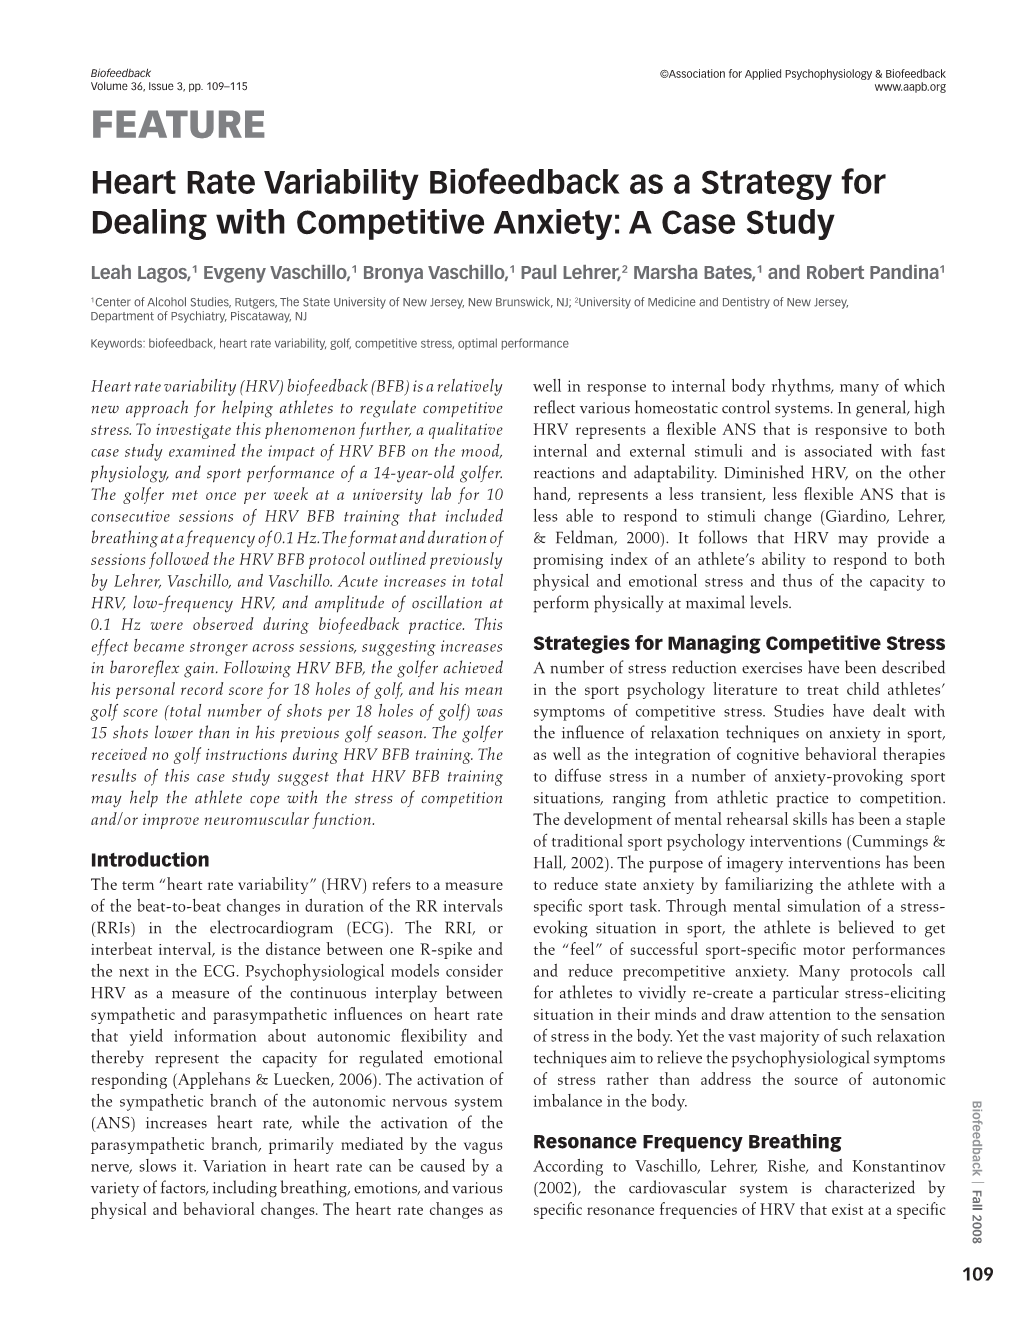 FEATURE Heart Rate Variability Biofeedback As a Strategy for Dealing with Competitive Anxiety: a Case Study